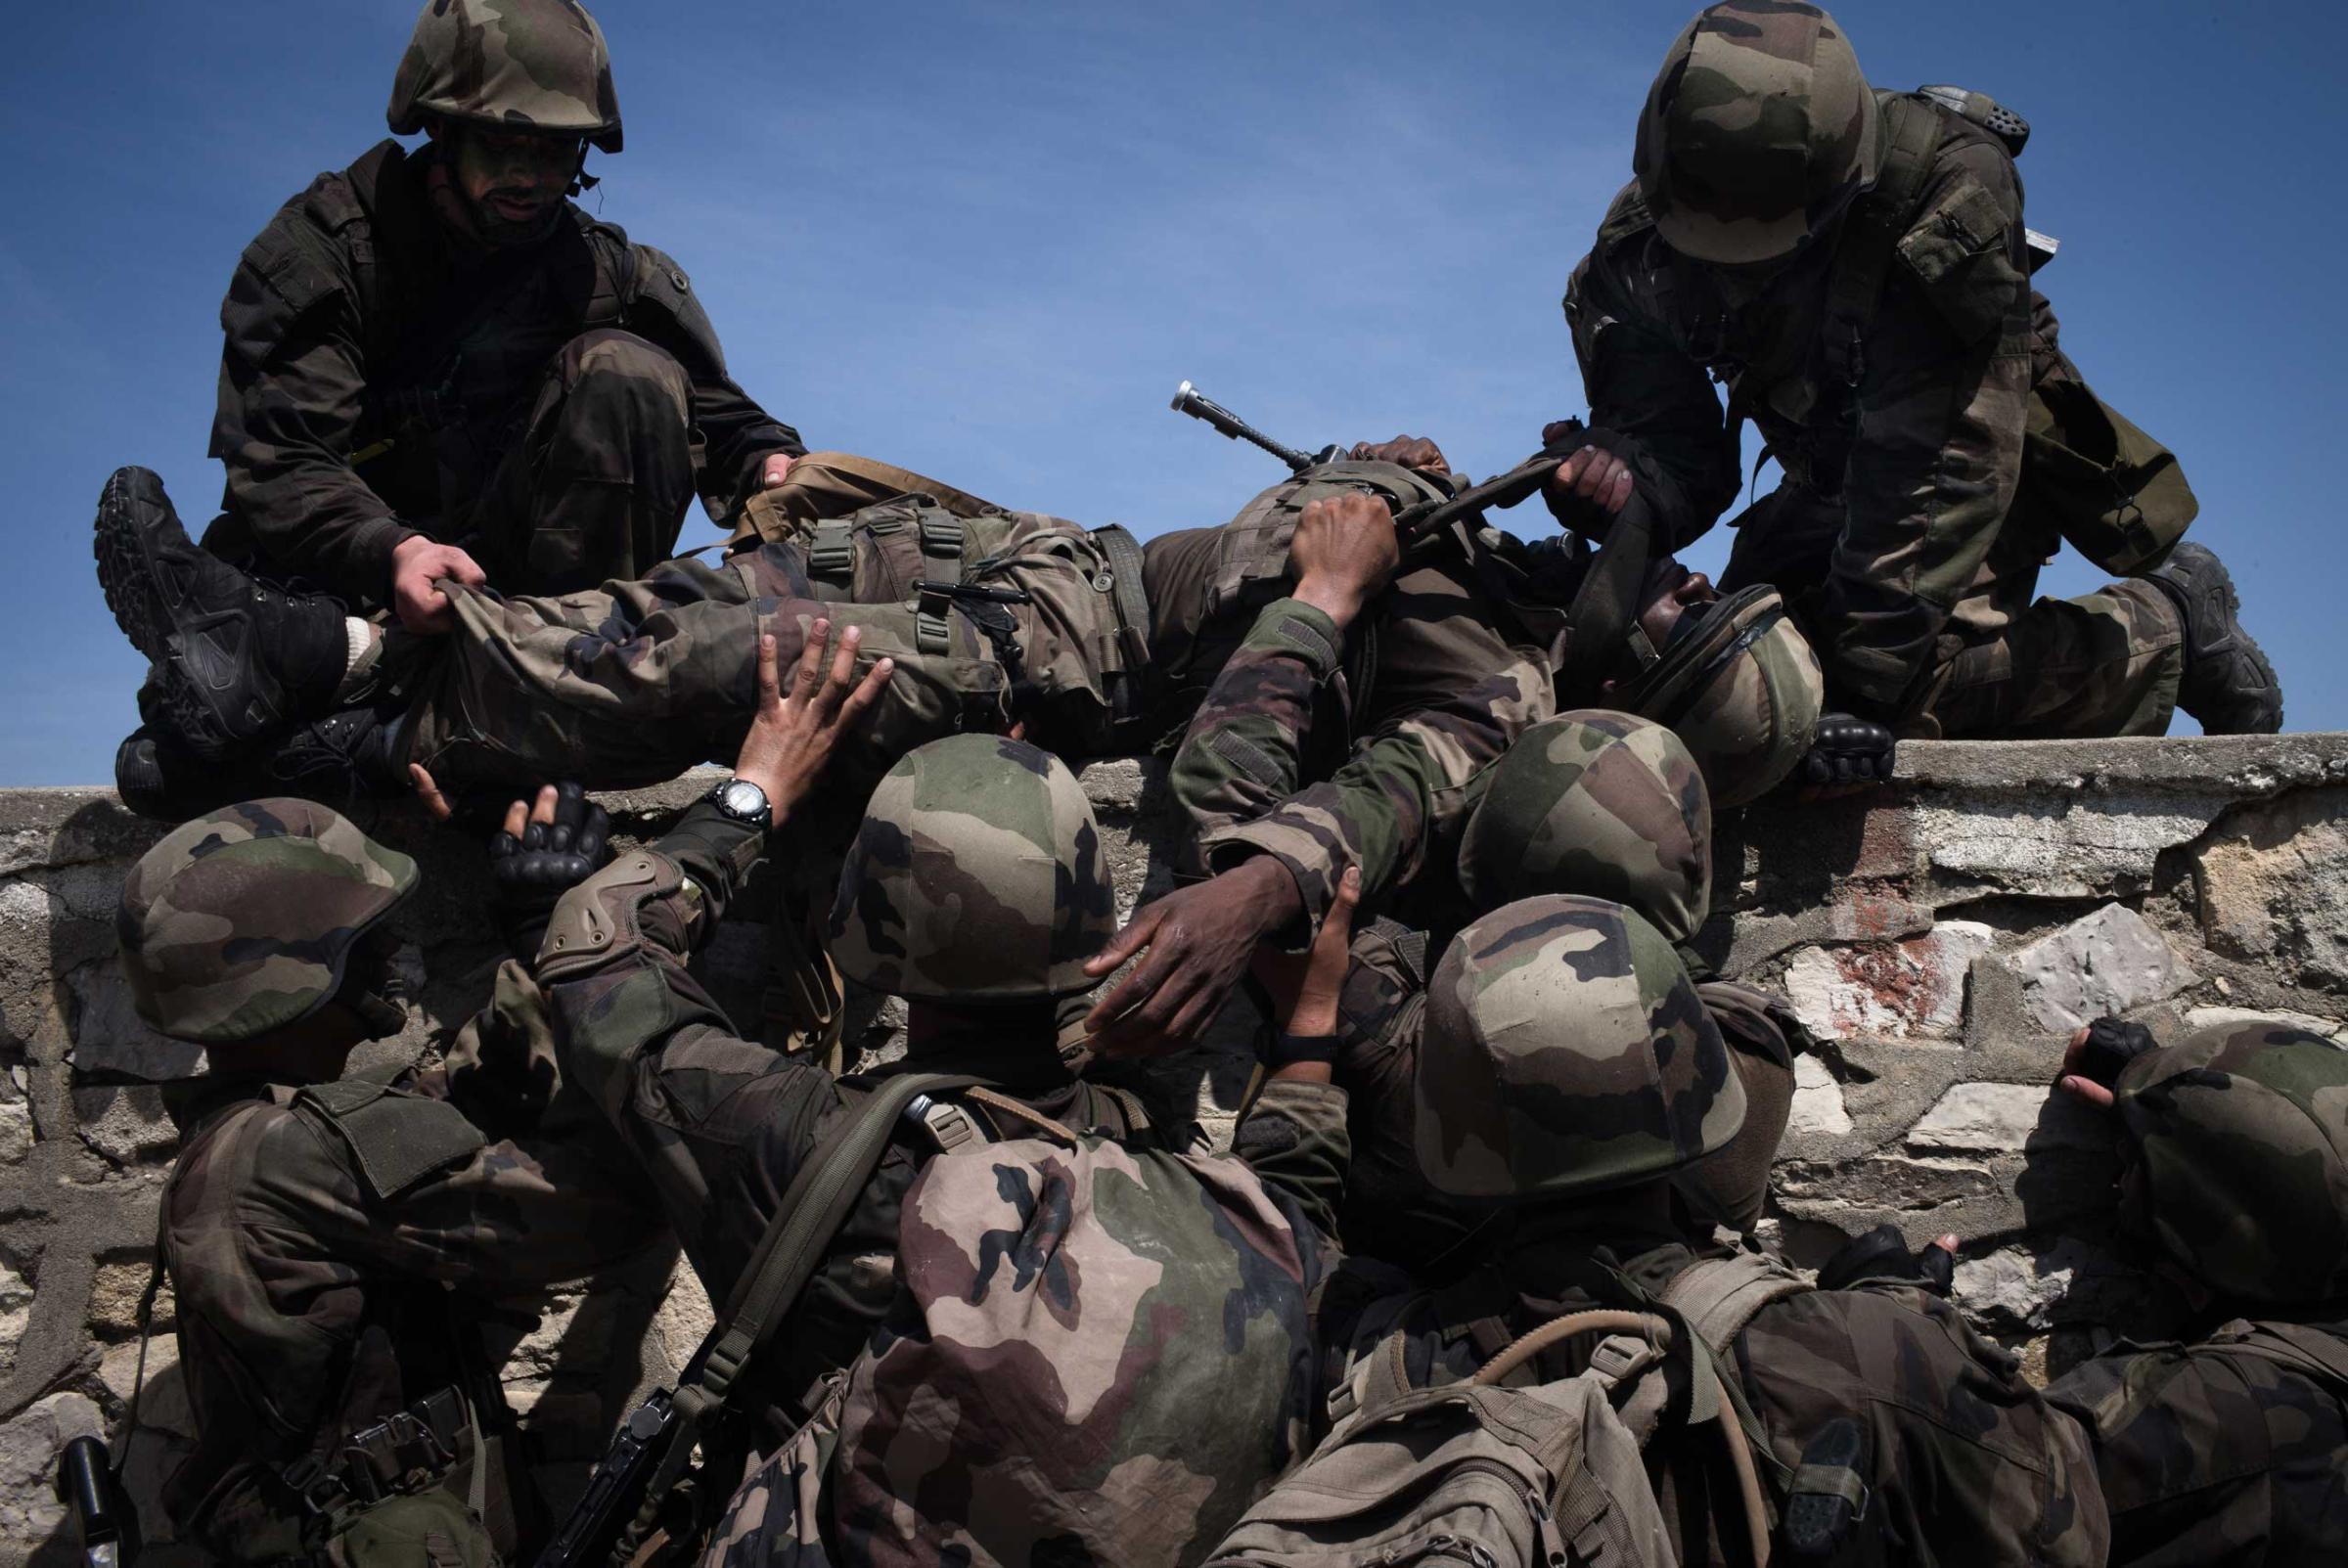 Body extraction training exercise in the French Foreign Legion camp near Nimes, France. Aug. 7, 2015.